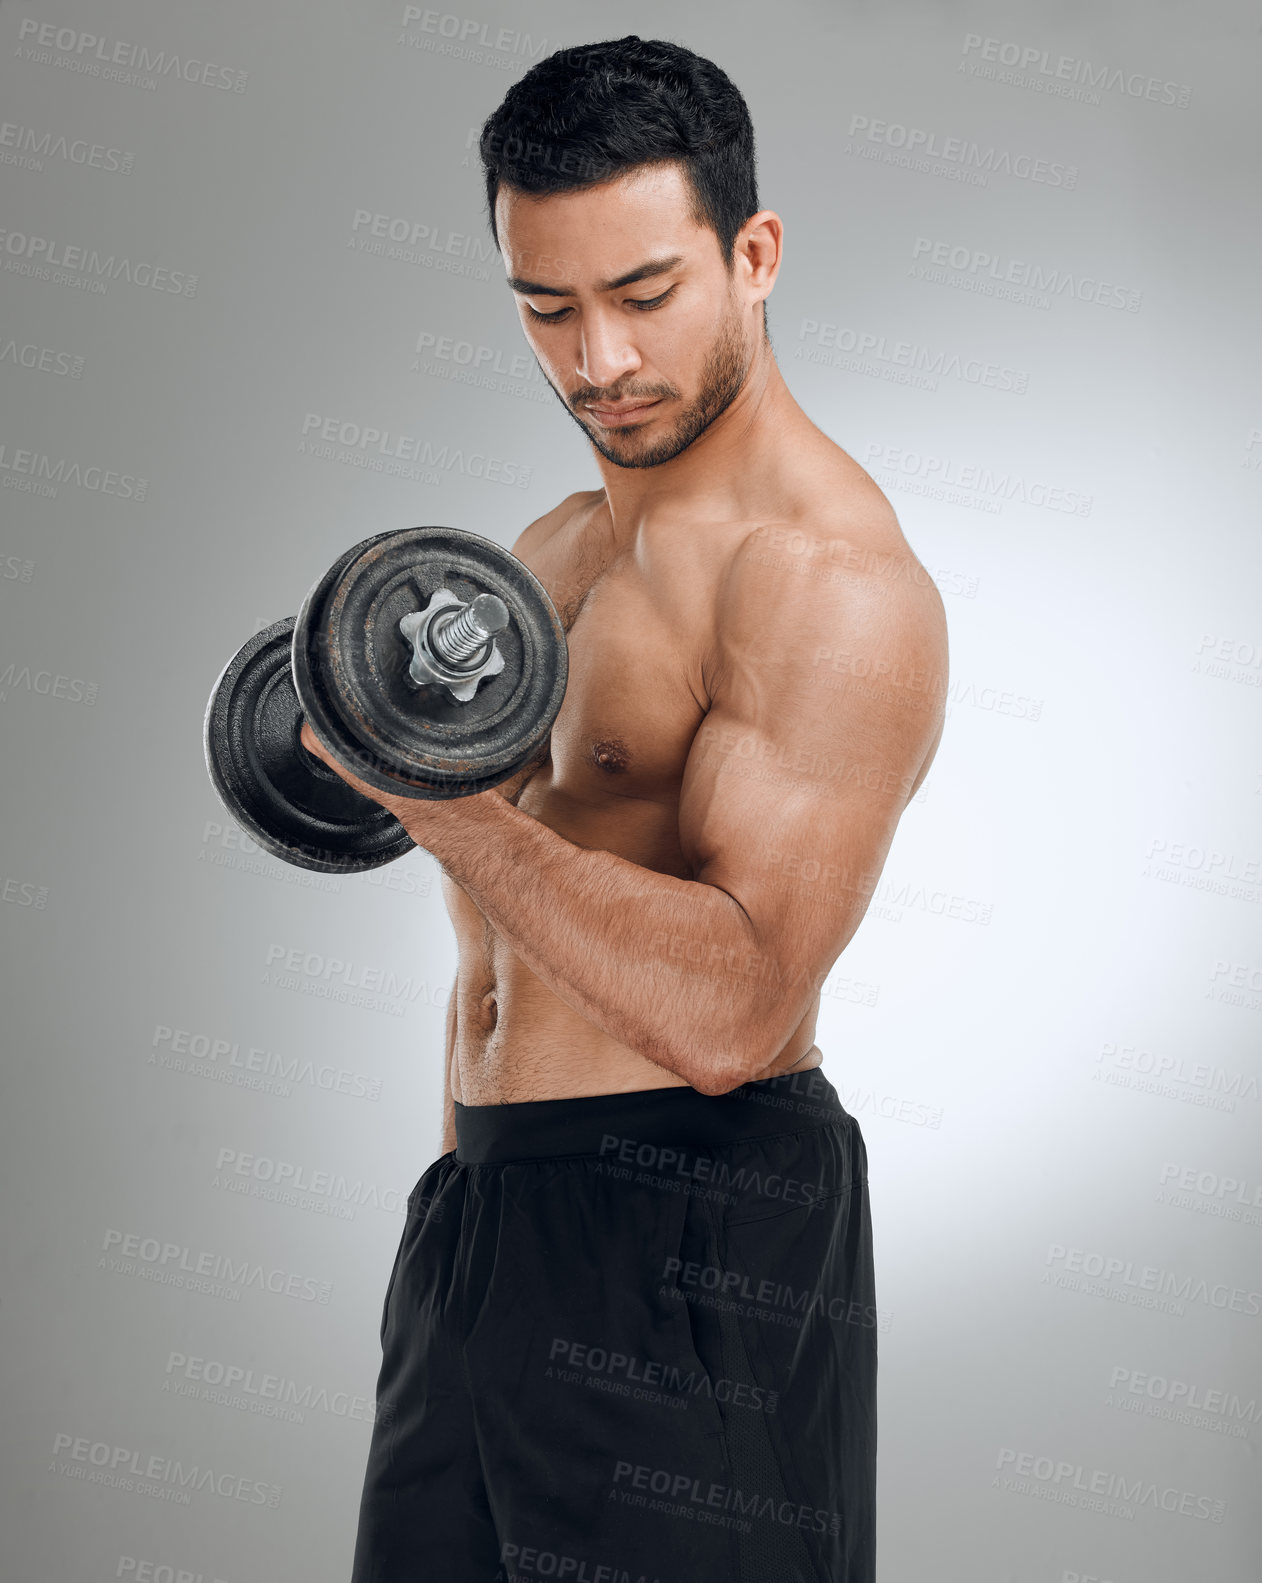 Buy stock photo Shot of a man working out with weights while standing against a grey background